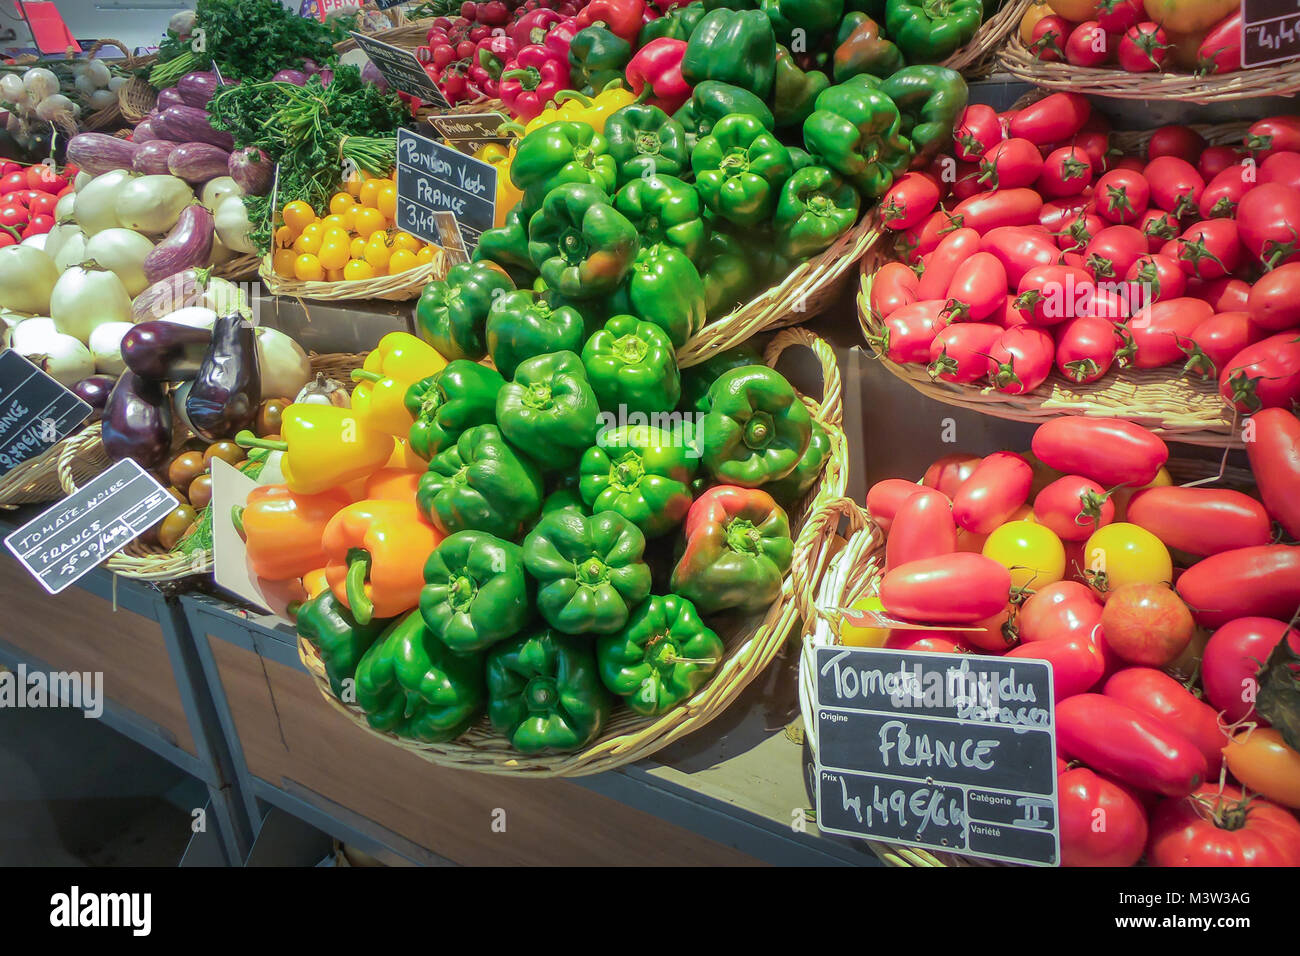 Fruit and vegetable market in France Stock Photo